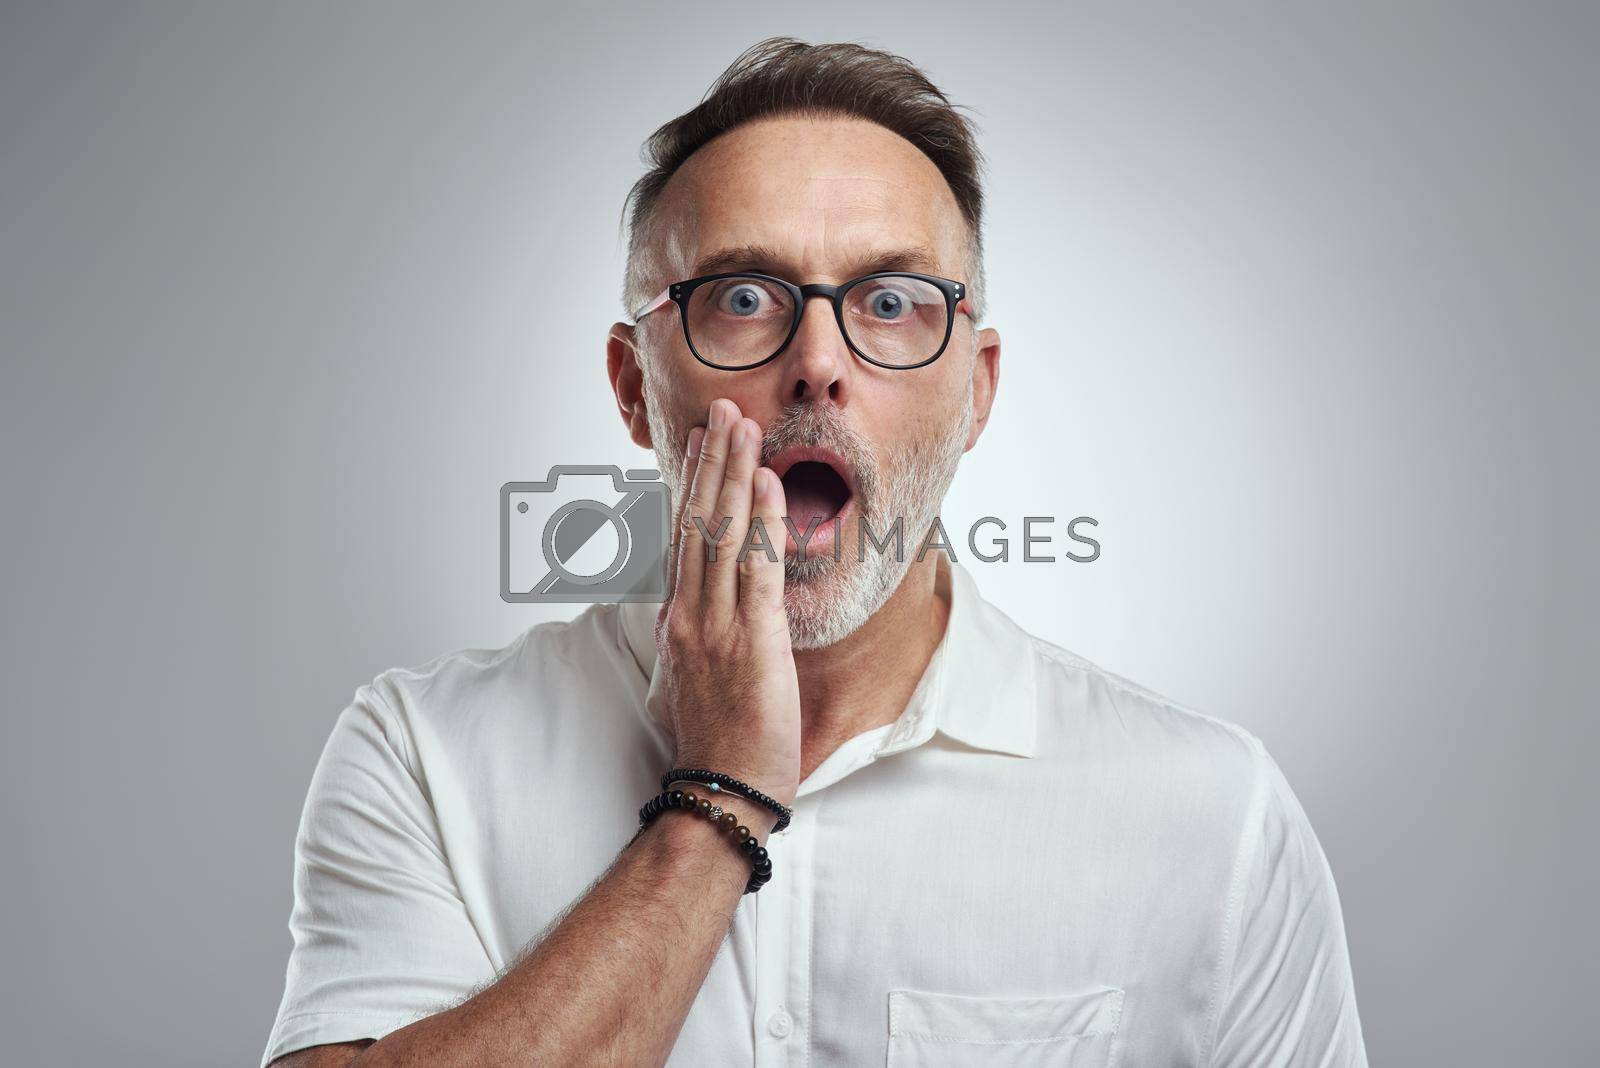 Royalty free image of I am beyond shocked. Studio portrait of a mature man looking surprised against a grey background. by YuriArcurs